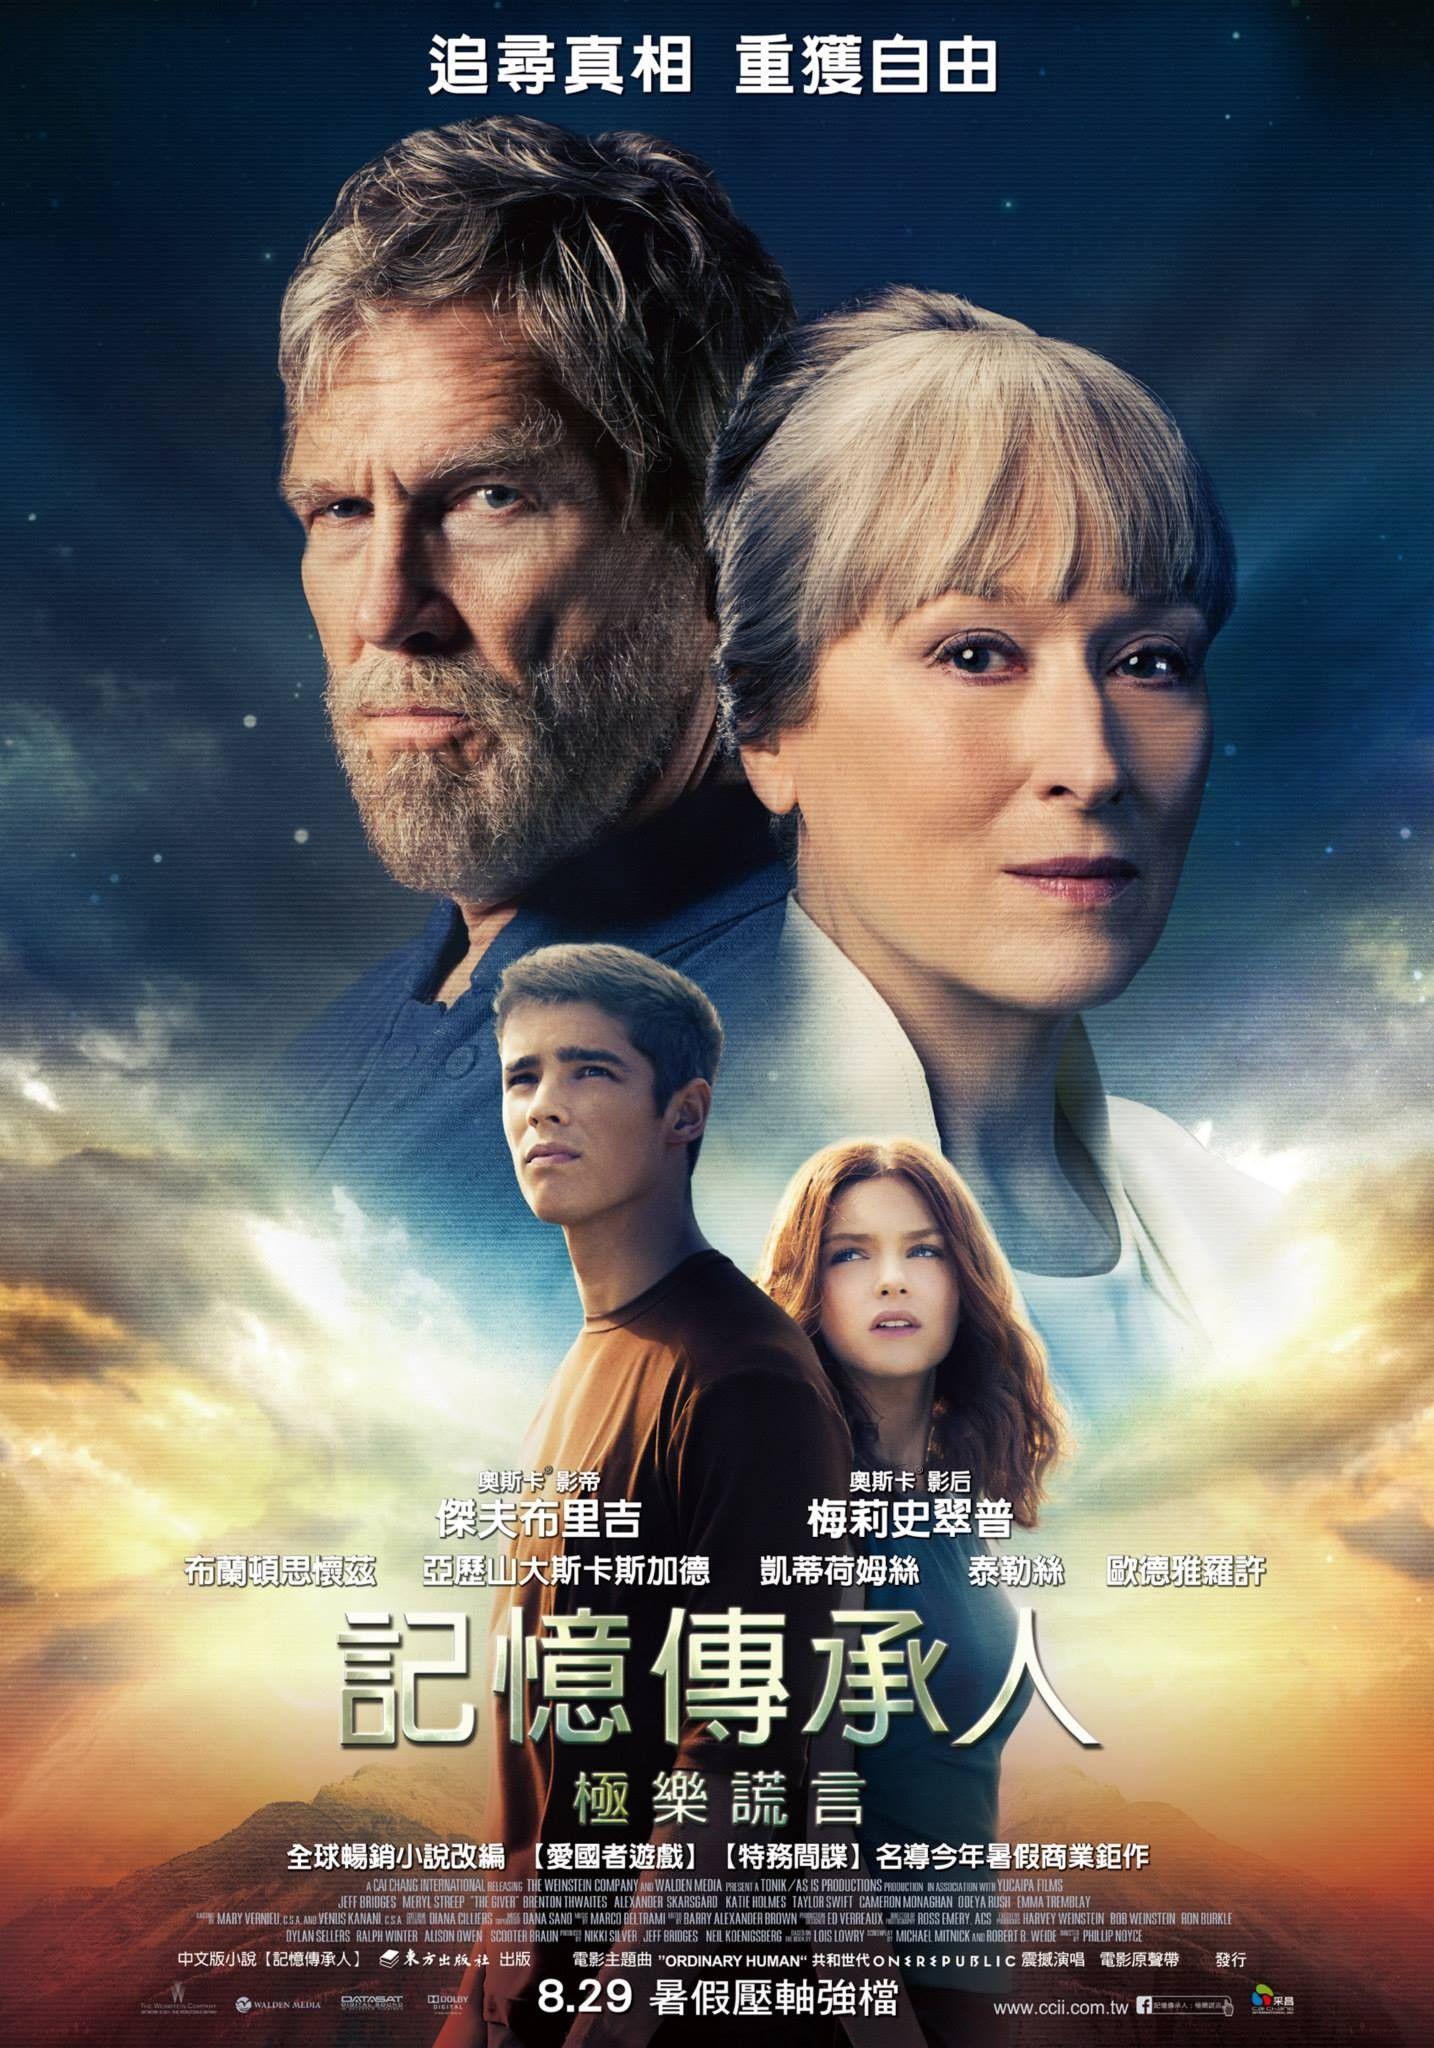 The Giver Upcoming Movies. Movie Database. JoBlo.com